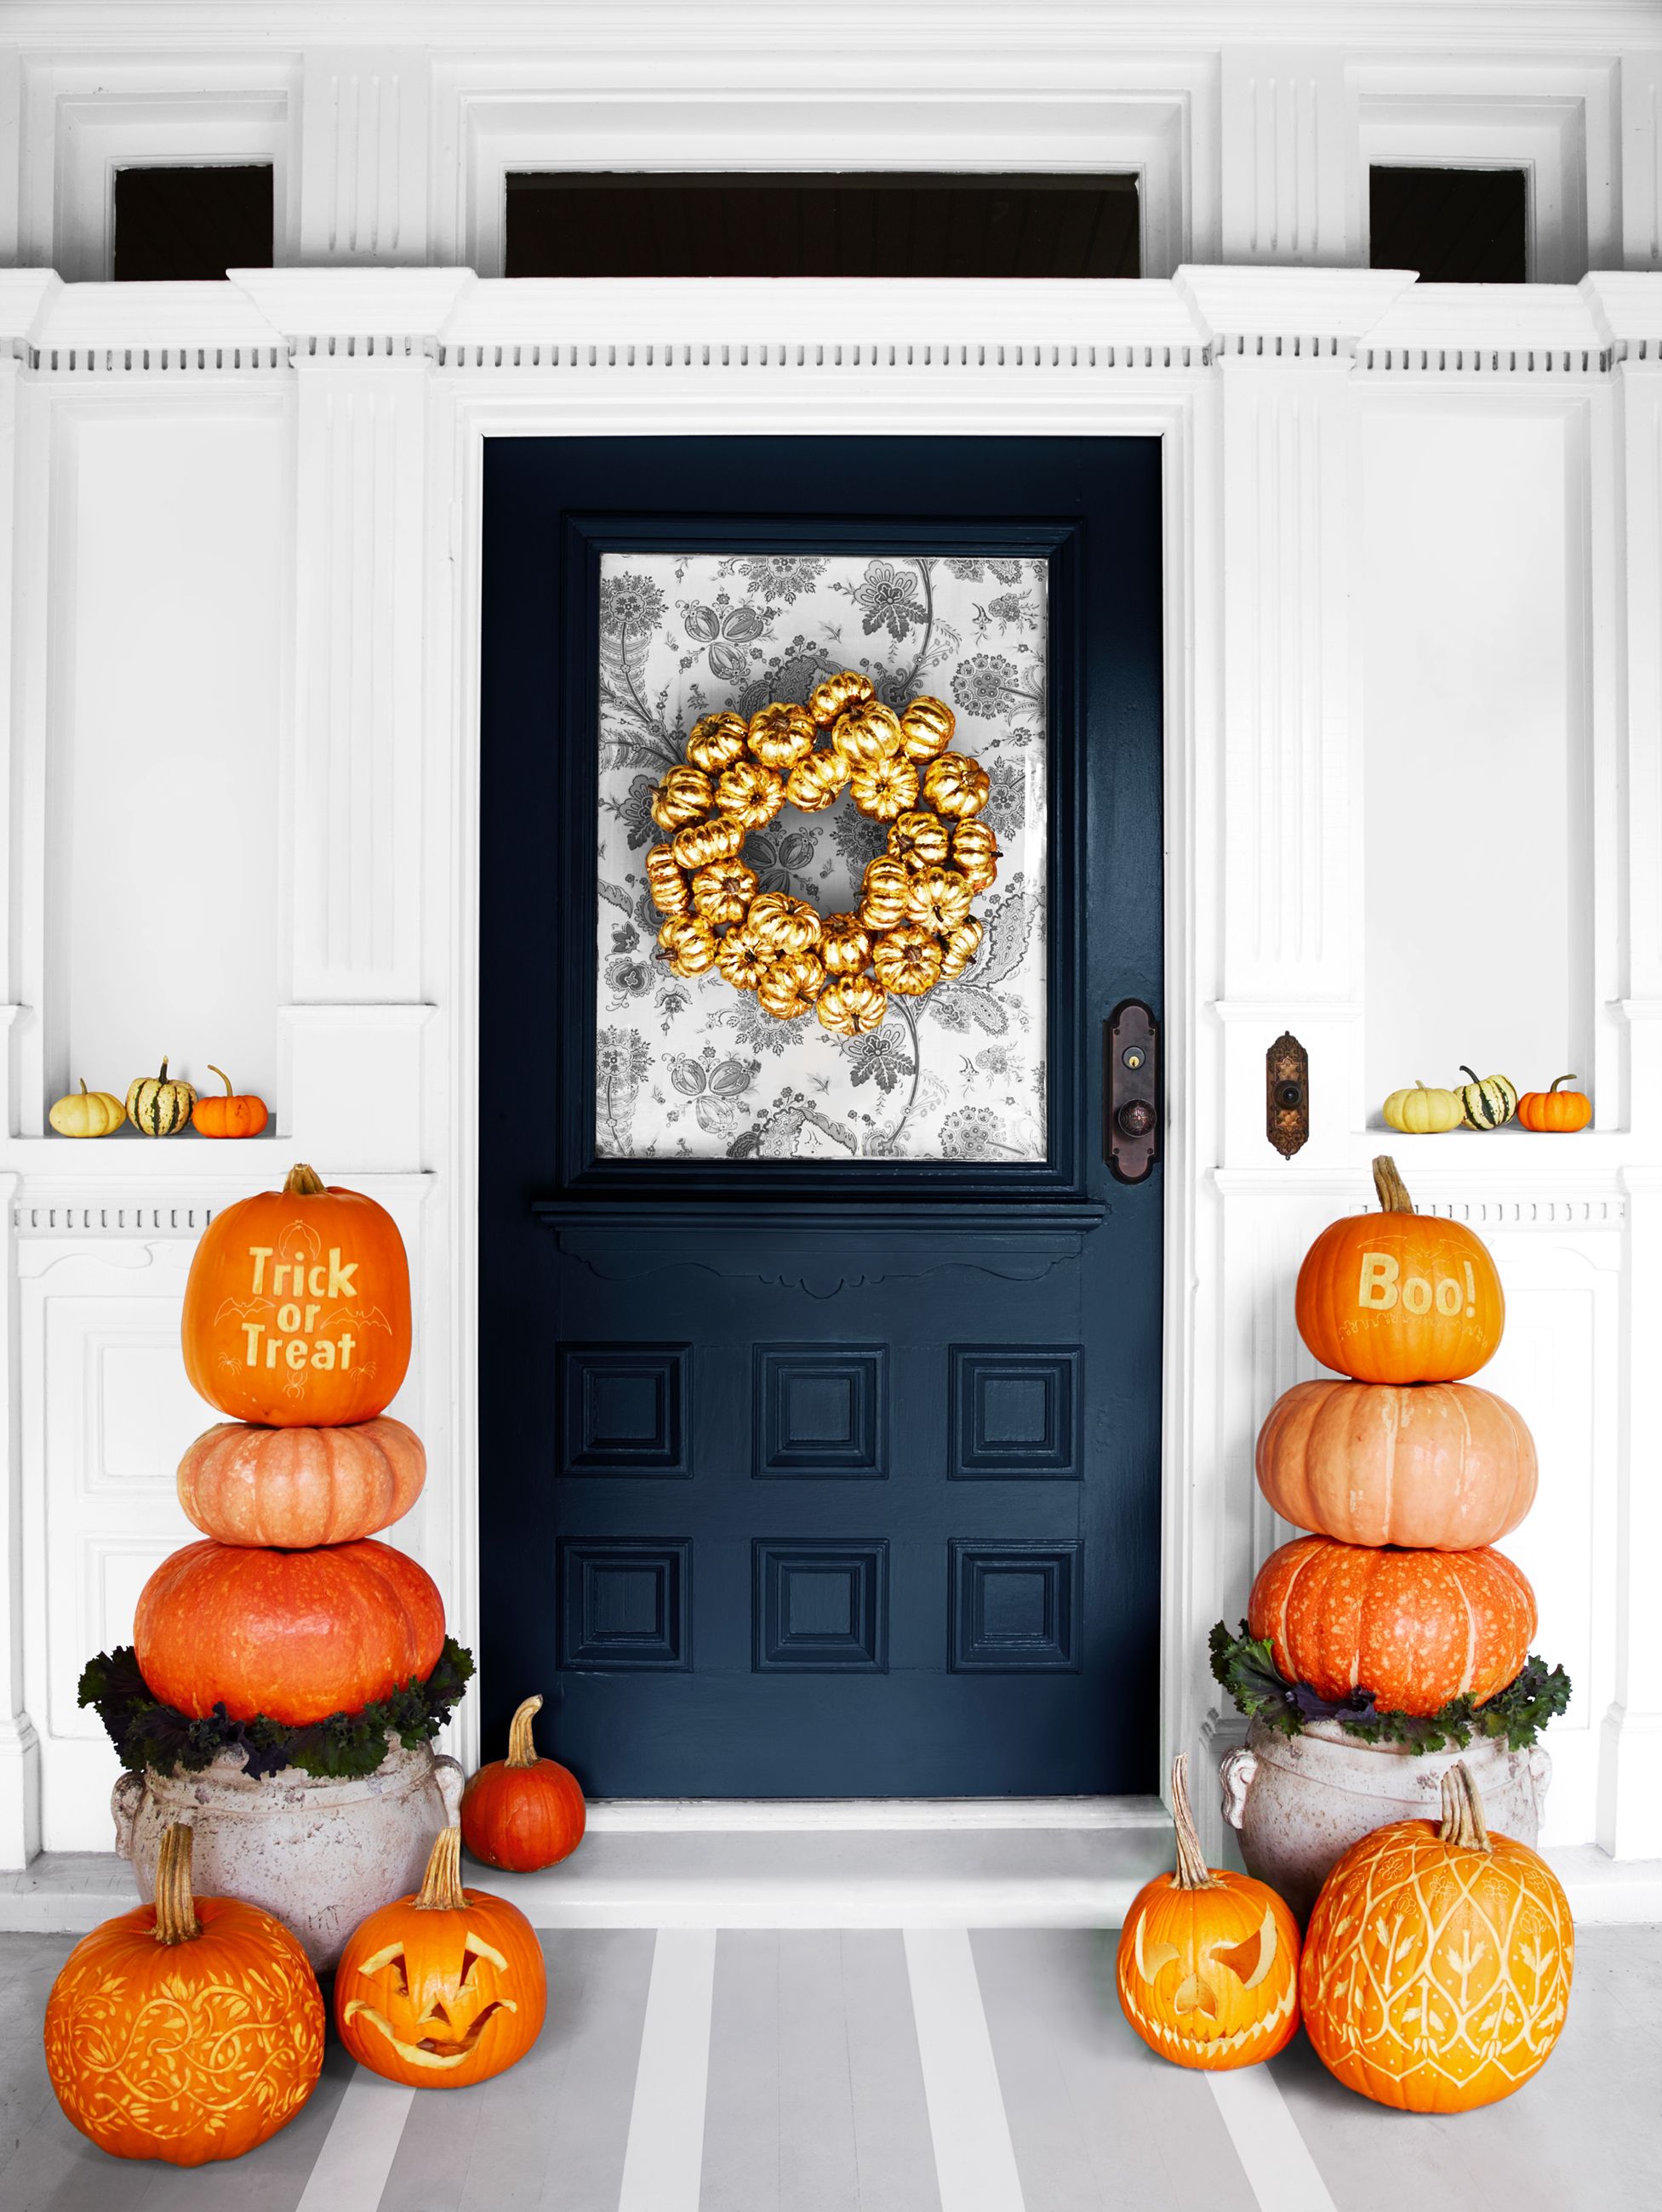 45 Best Fall Home Decorating Ideas 2021, Fall Living Room Decor 2021